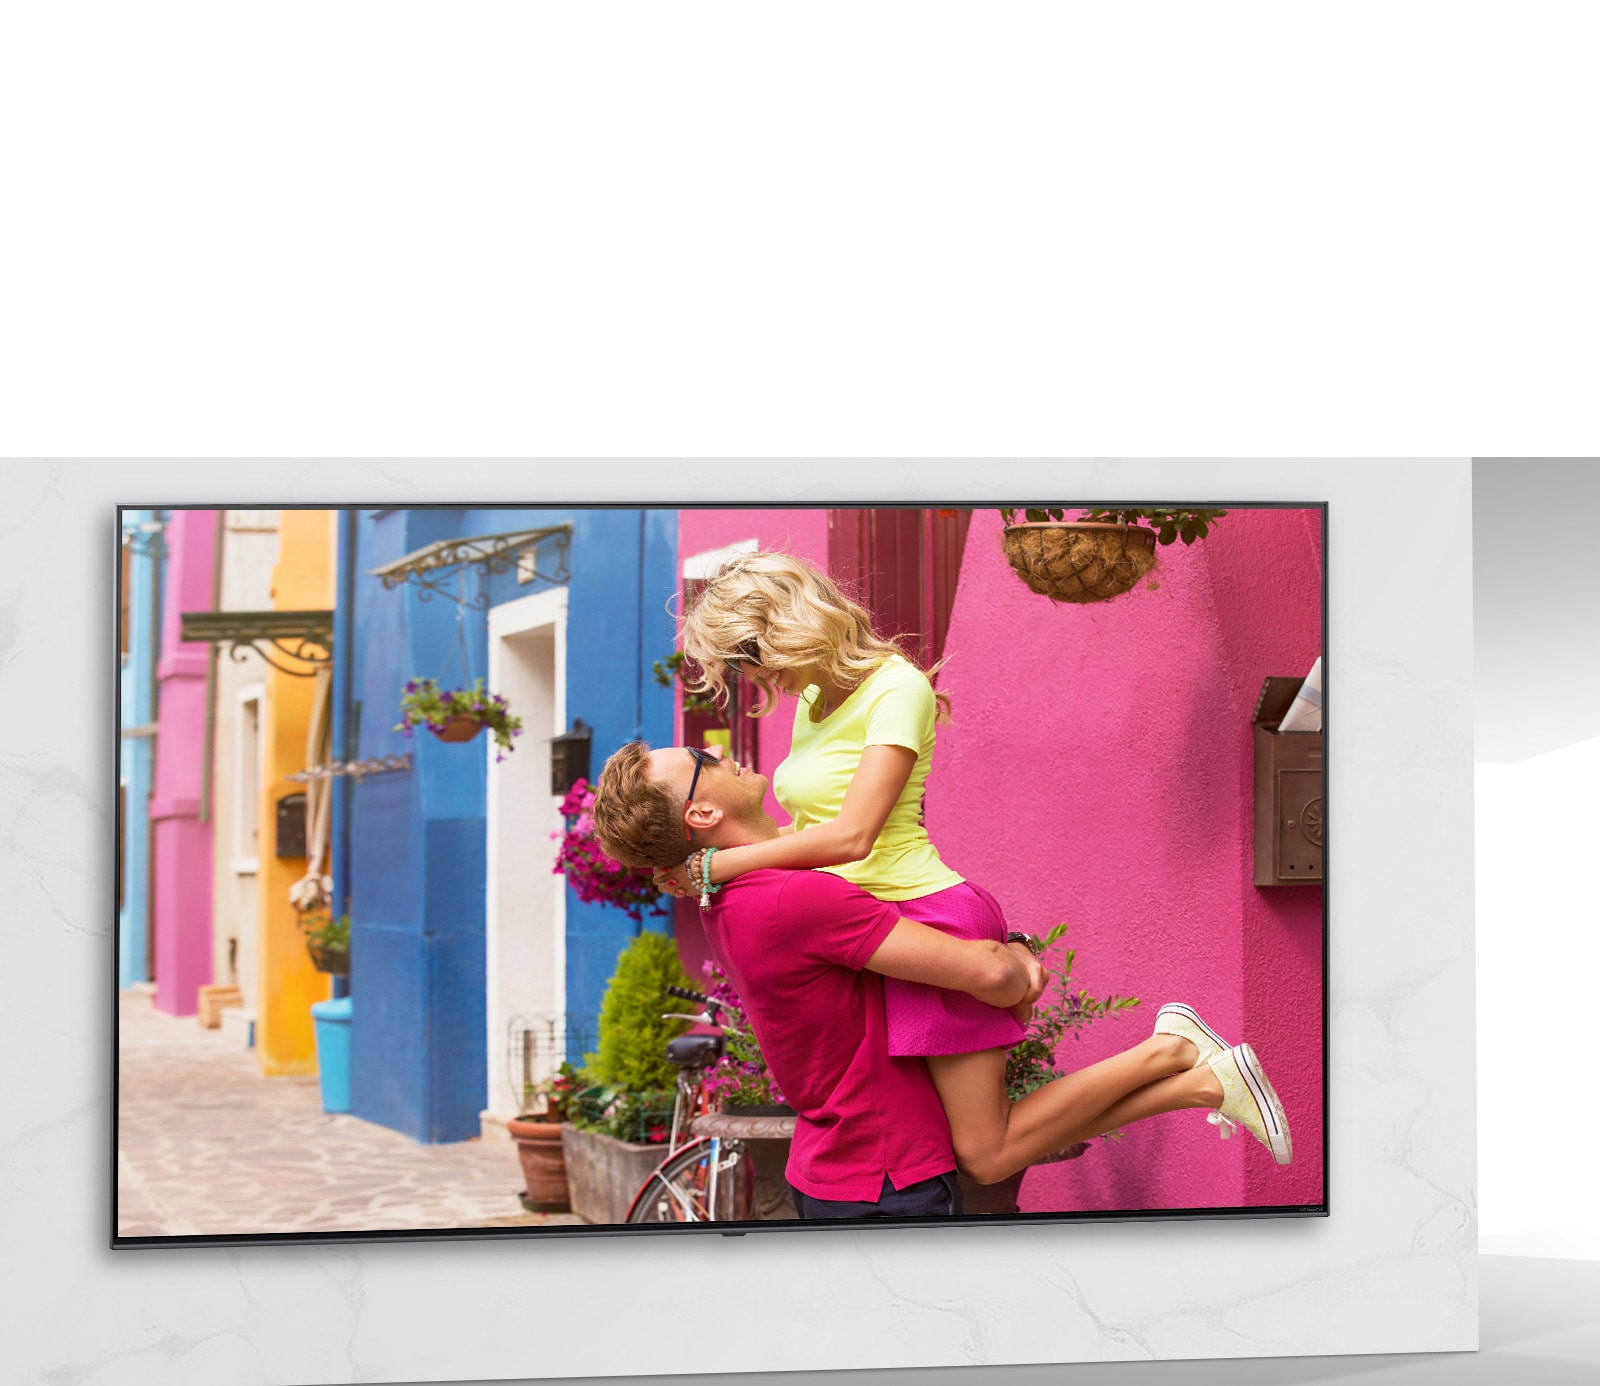 TV screen showing the scene of colorful romance movie with men and women hugging.